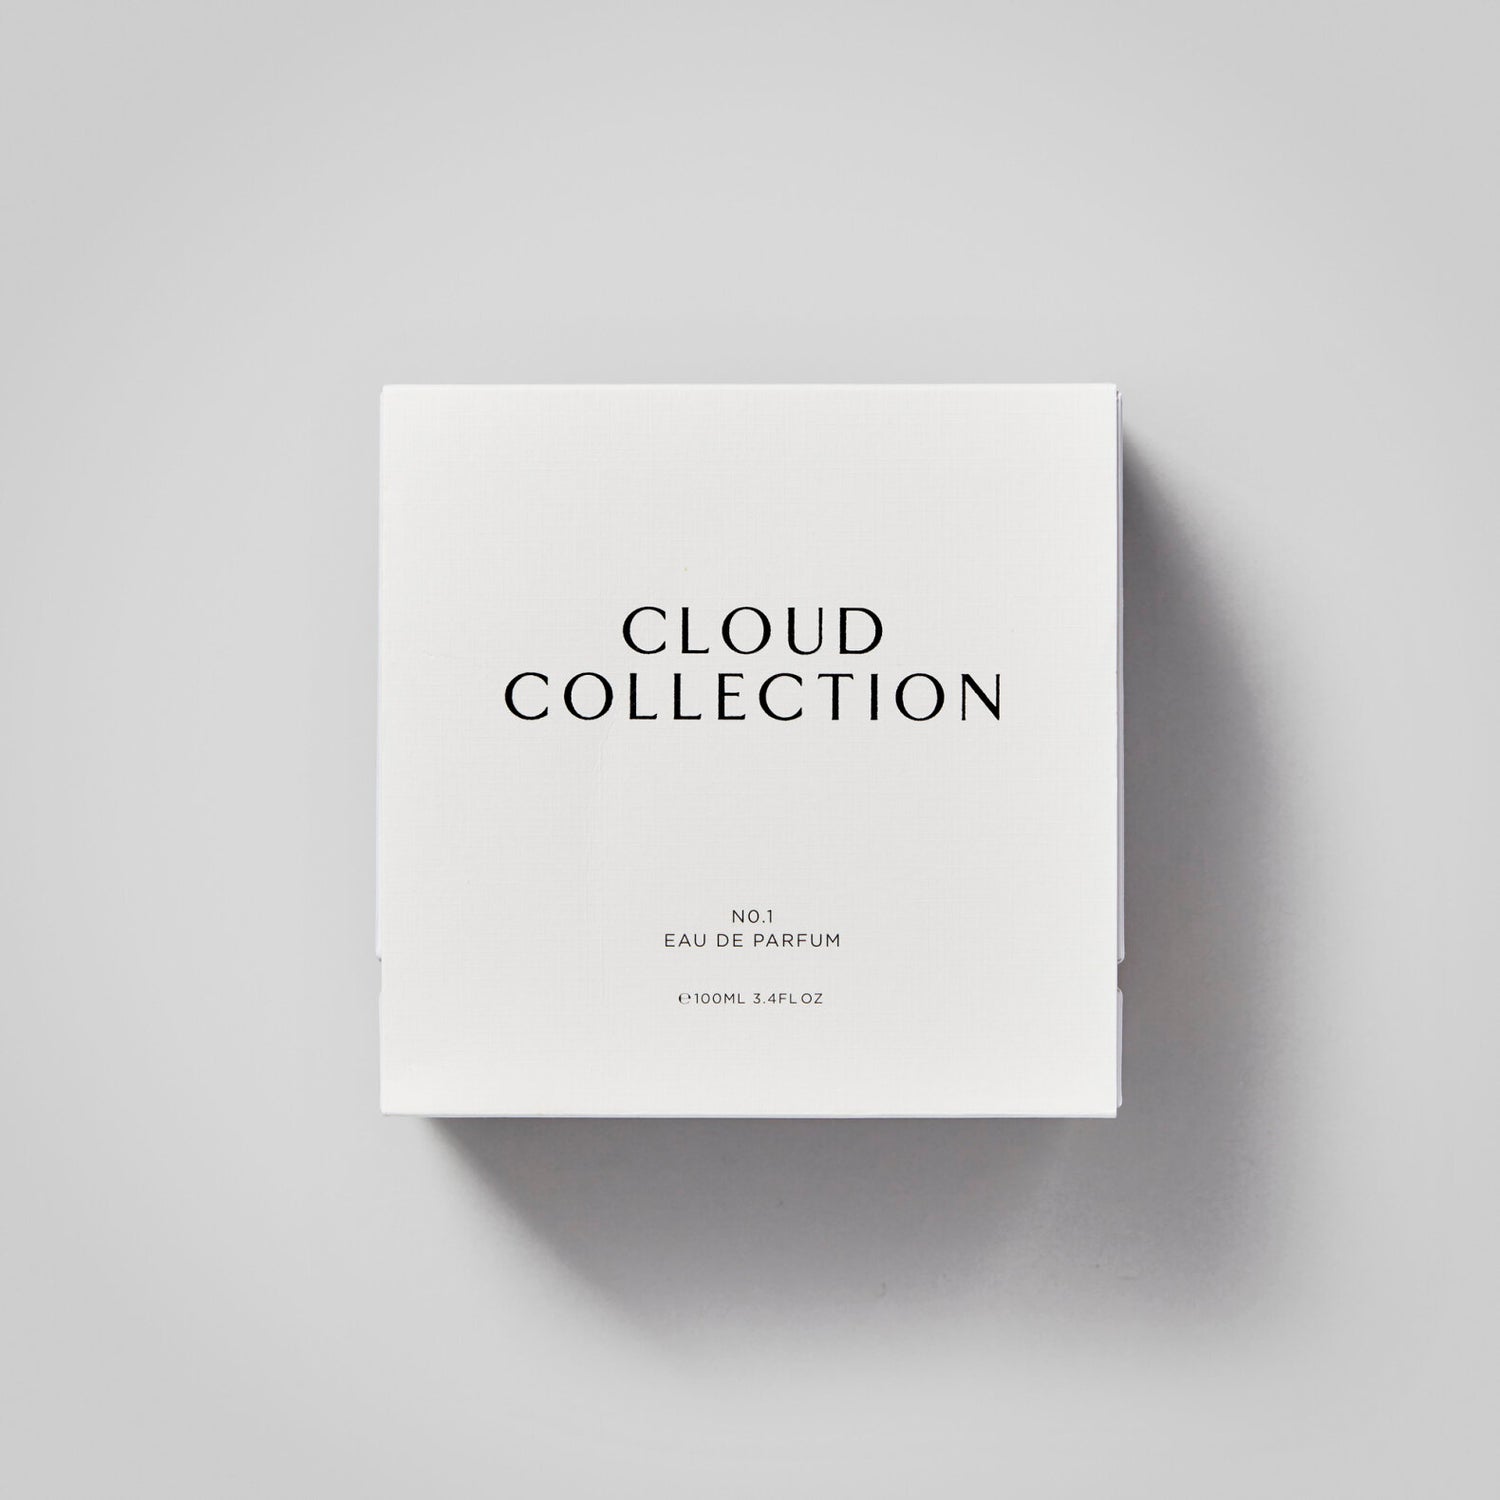 CLOUD COLLECTION No.1 100ml